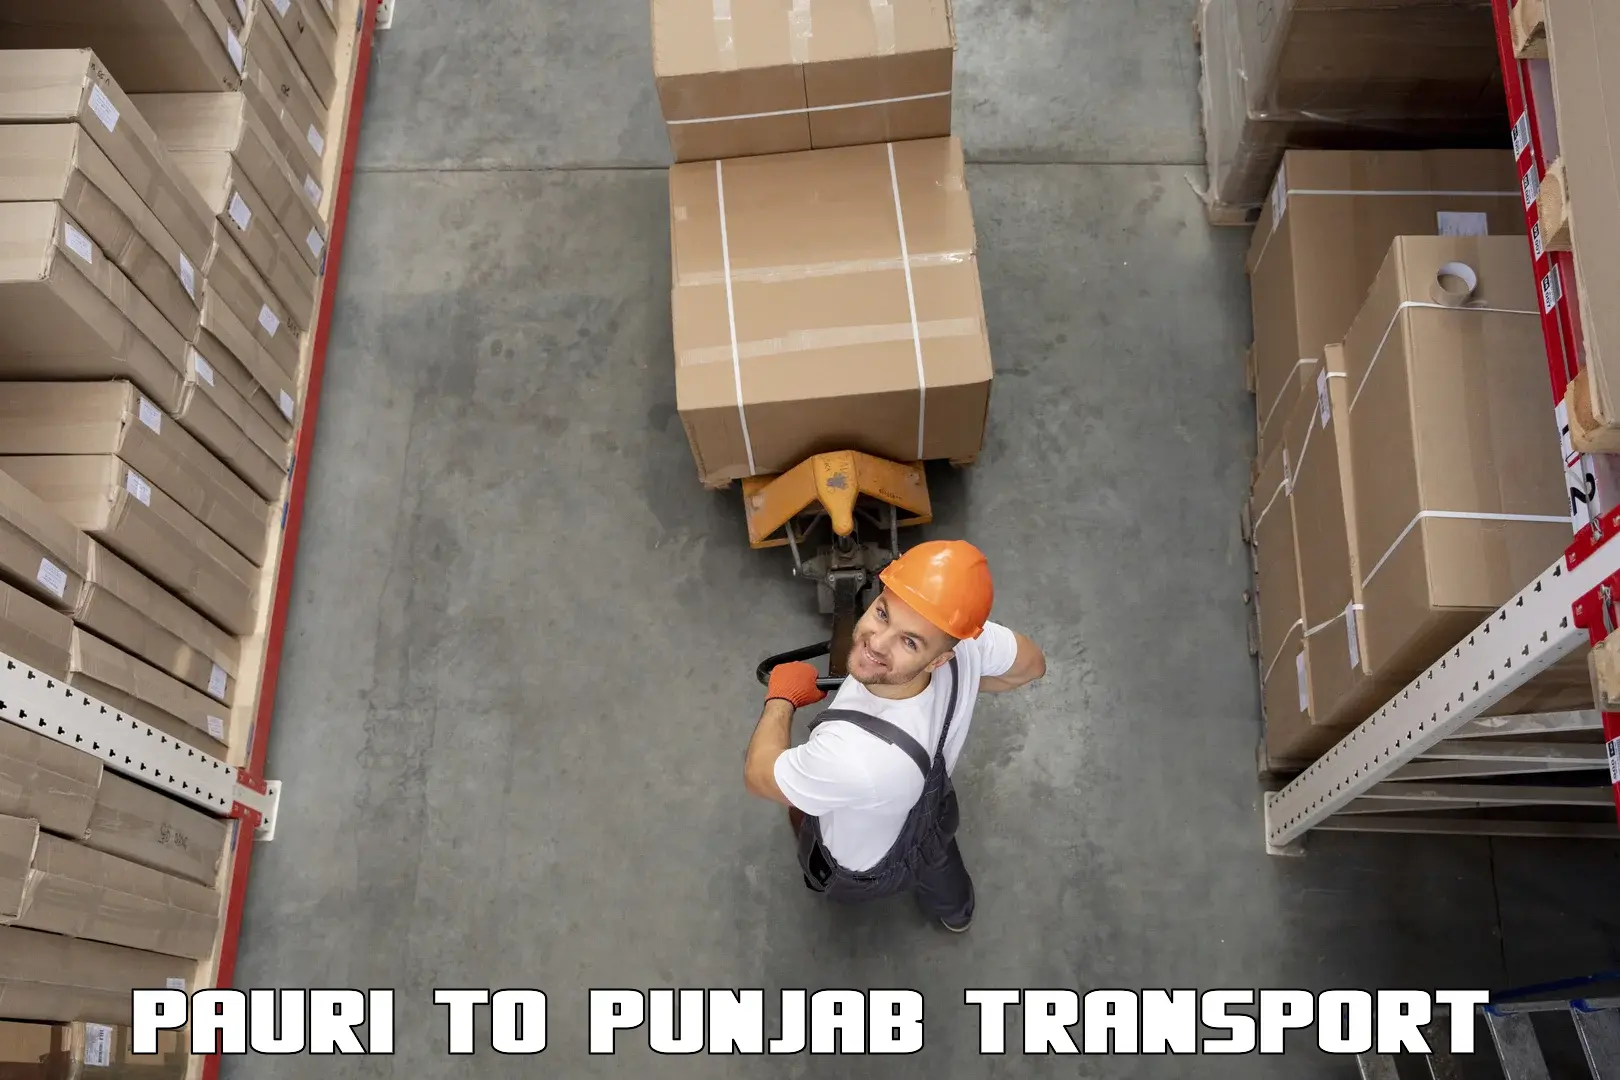 Road transport online services Pauri to Goindwal Sahib